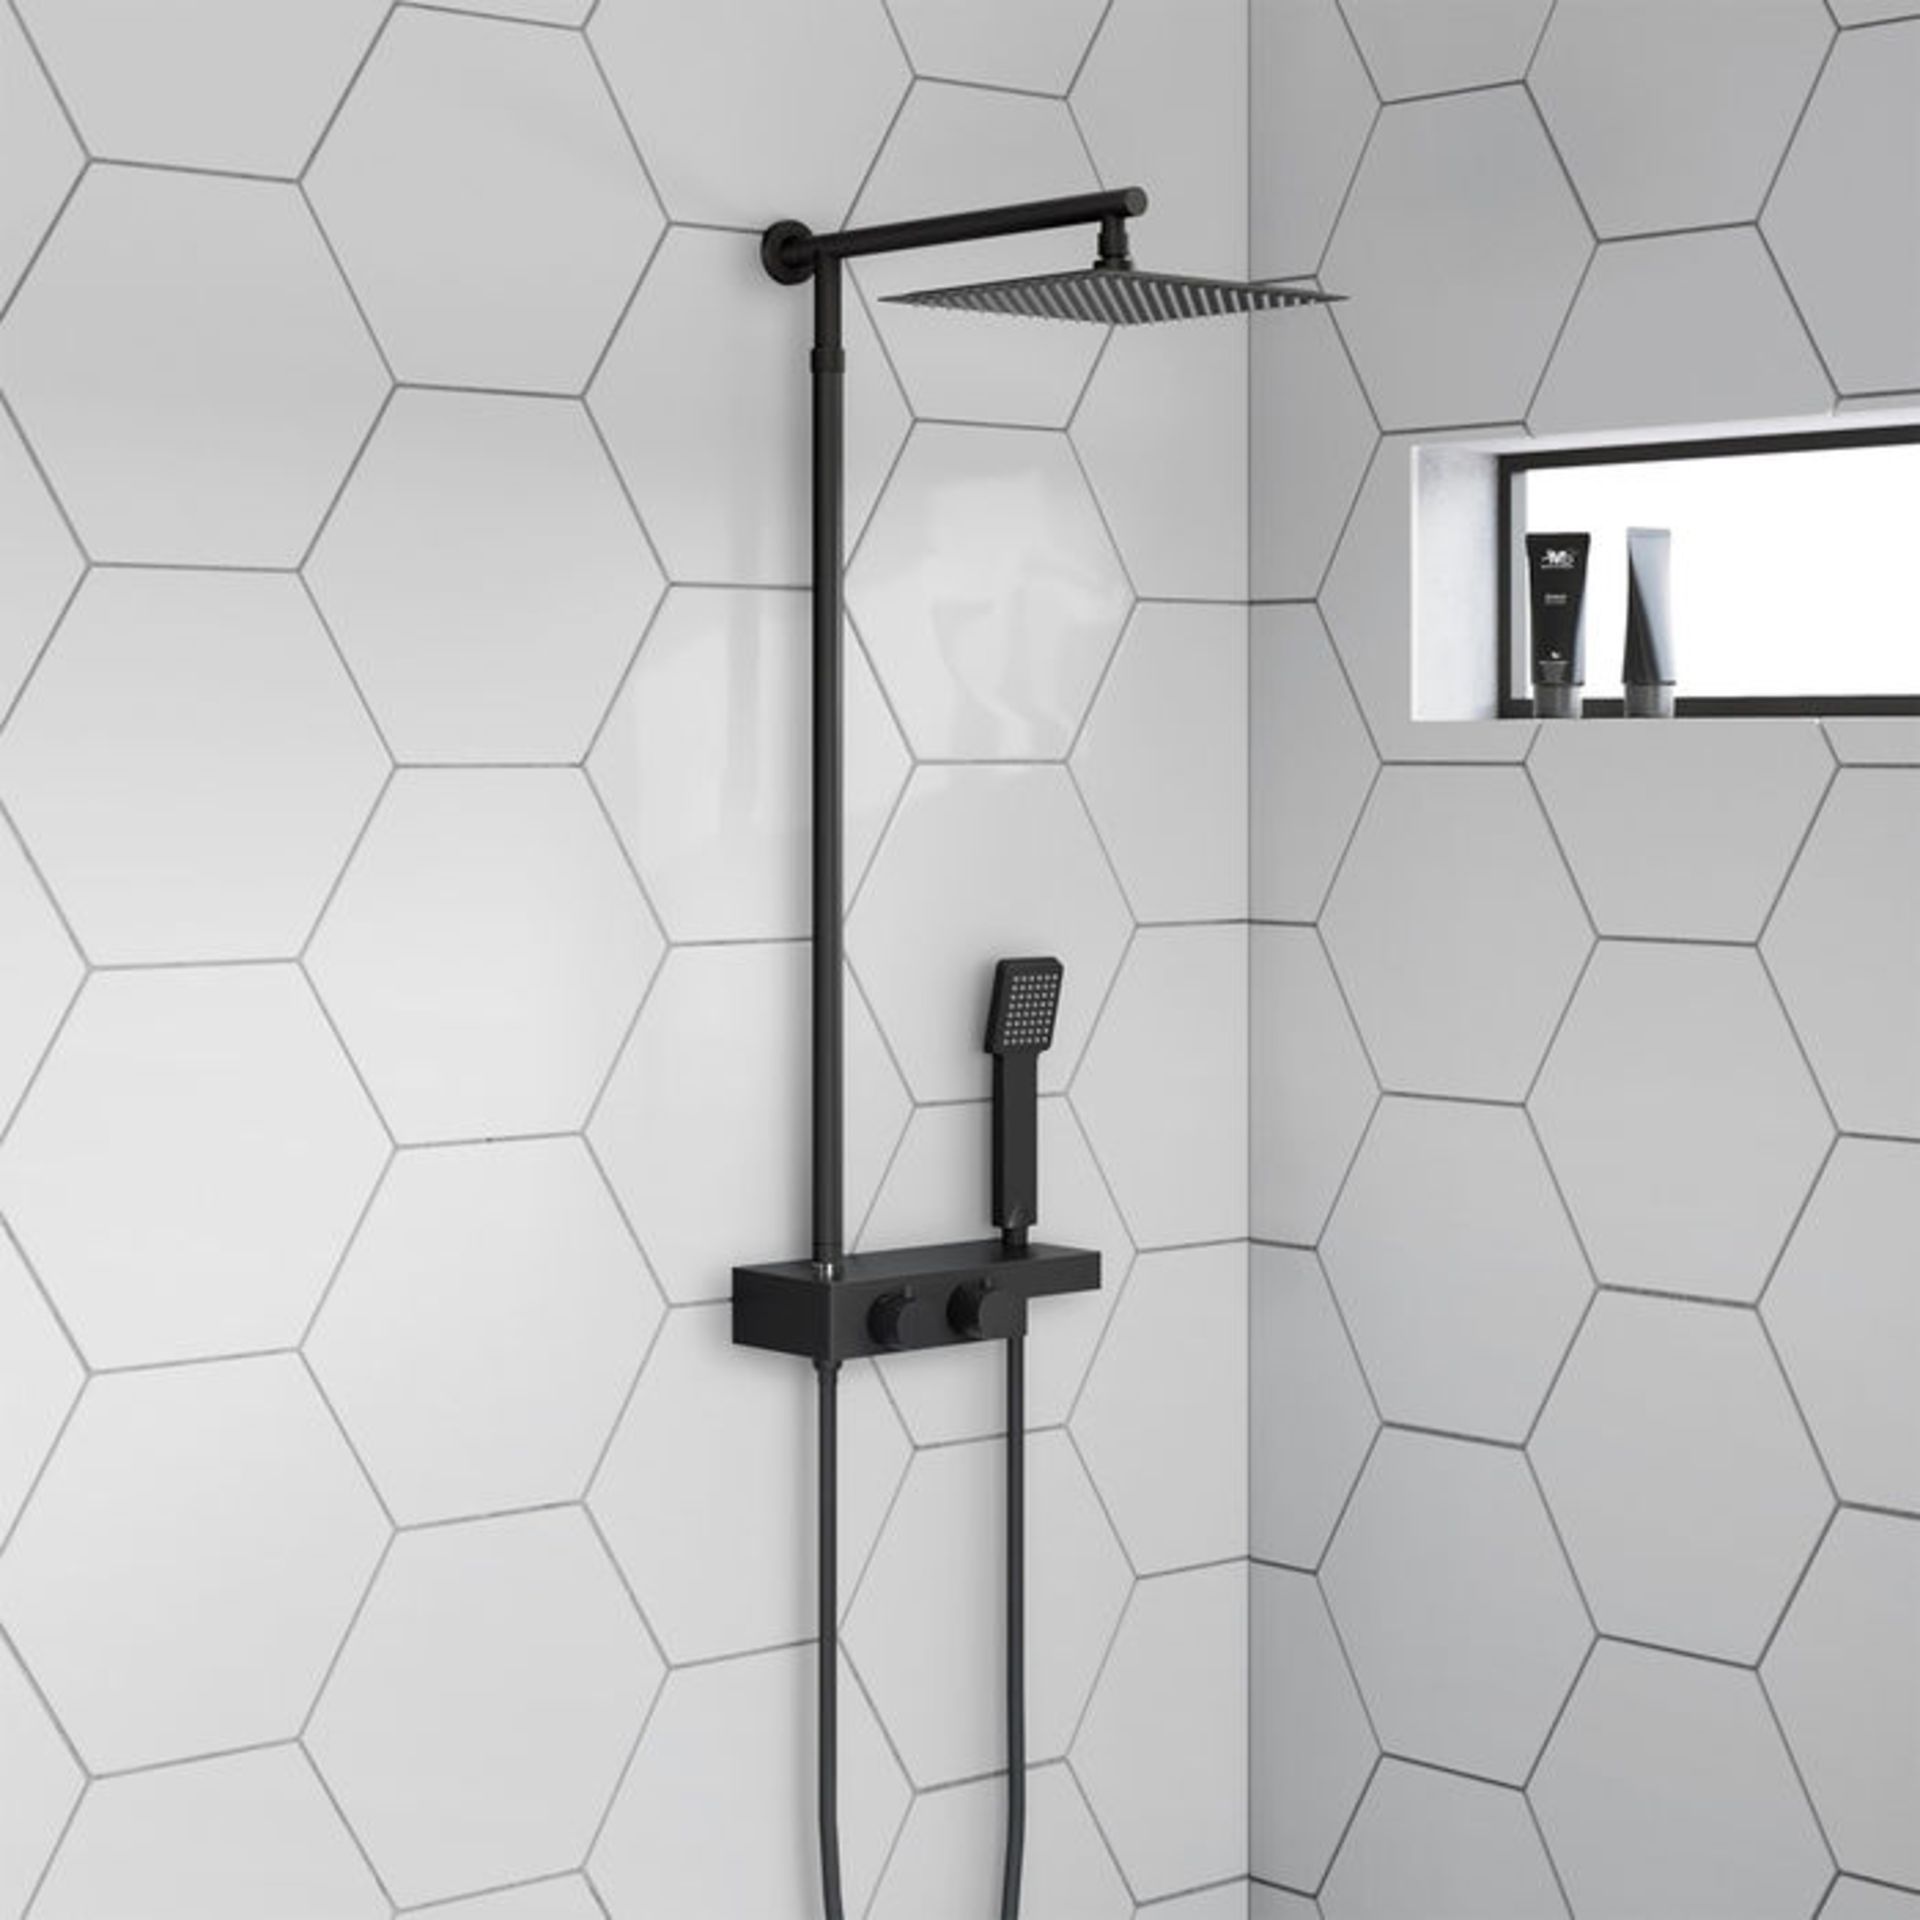 NEW & BOXDED Matte Black Square Thermostatic Mixer Shower Kit & Shelf. RRP £599.99.SP5102BL... - Image 2 of 3